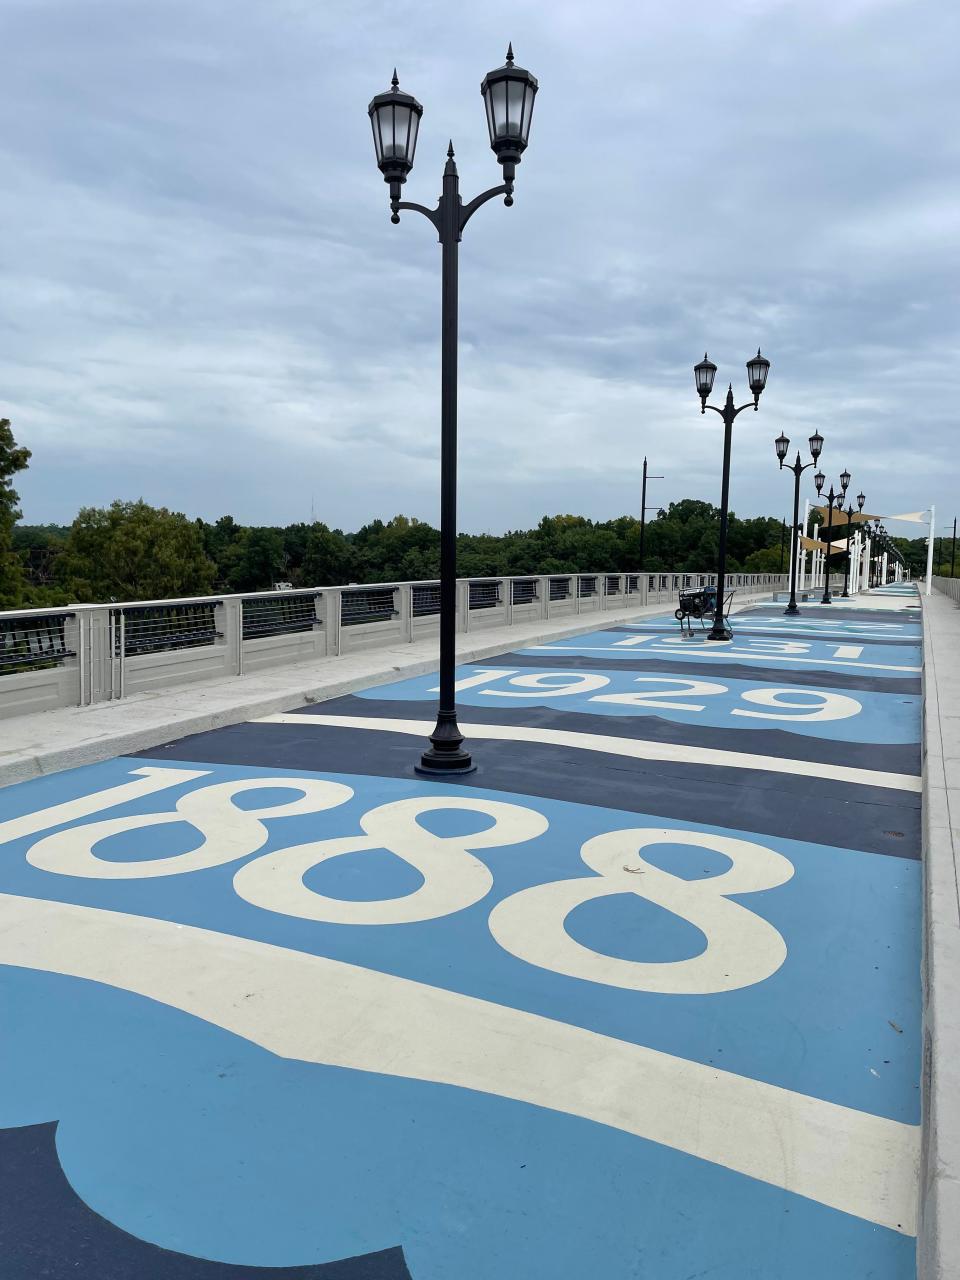 The painted surface of Augusta's Fifth Street bridge bears important dates in the bridge's history. Floods severely damaged the bridge in 1888 and 1929, and the current bridge was completed in 1931, months before its official June 1932 opening.